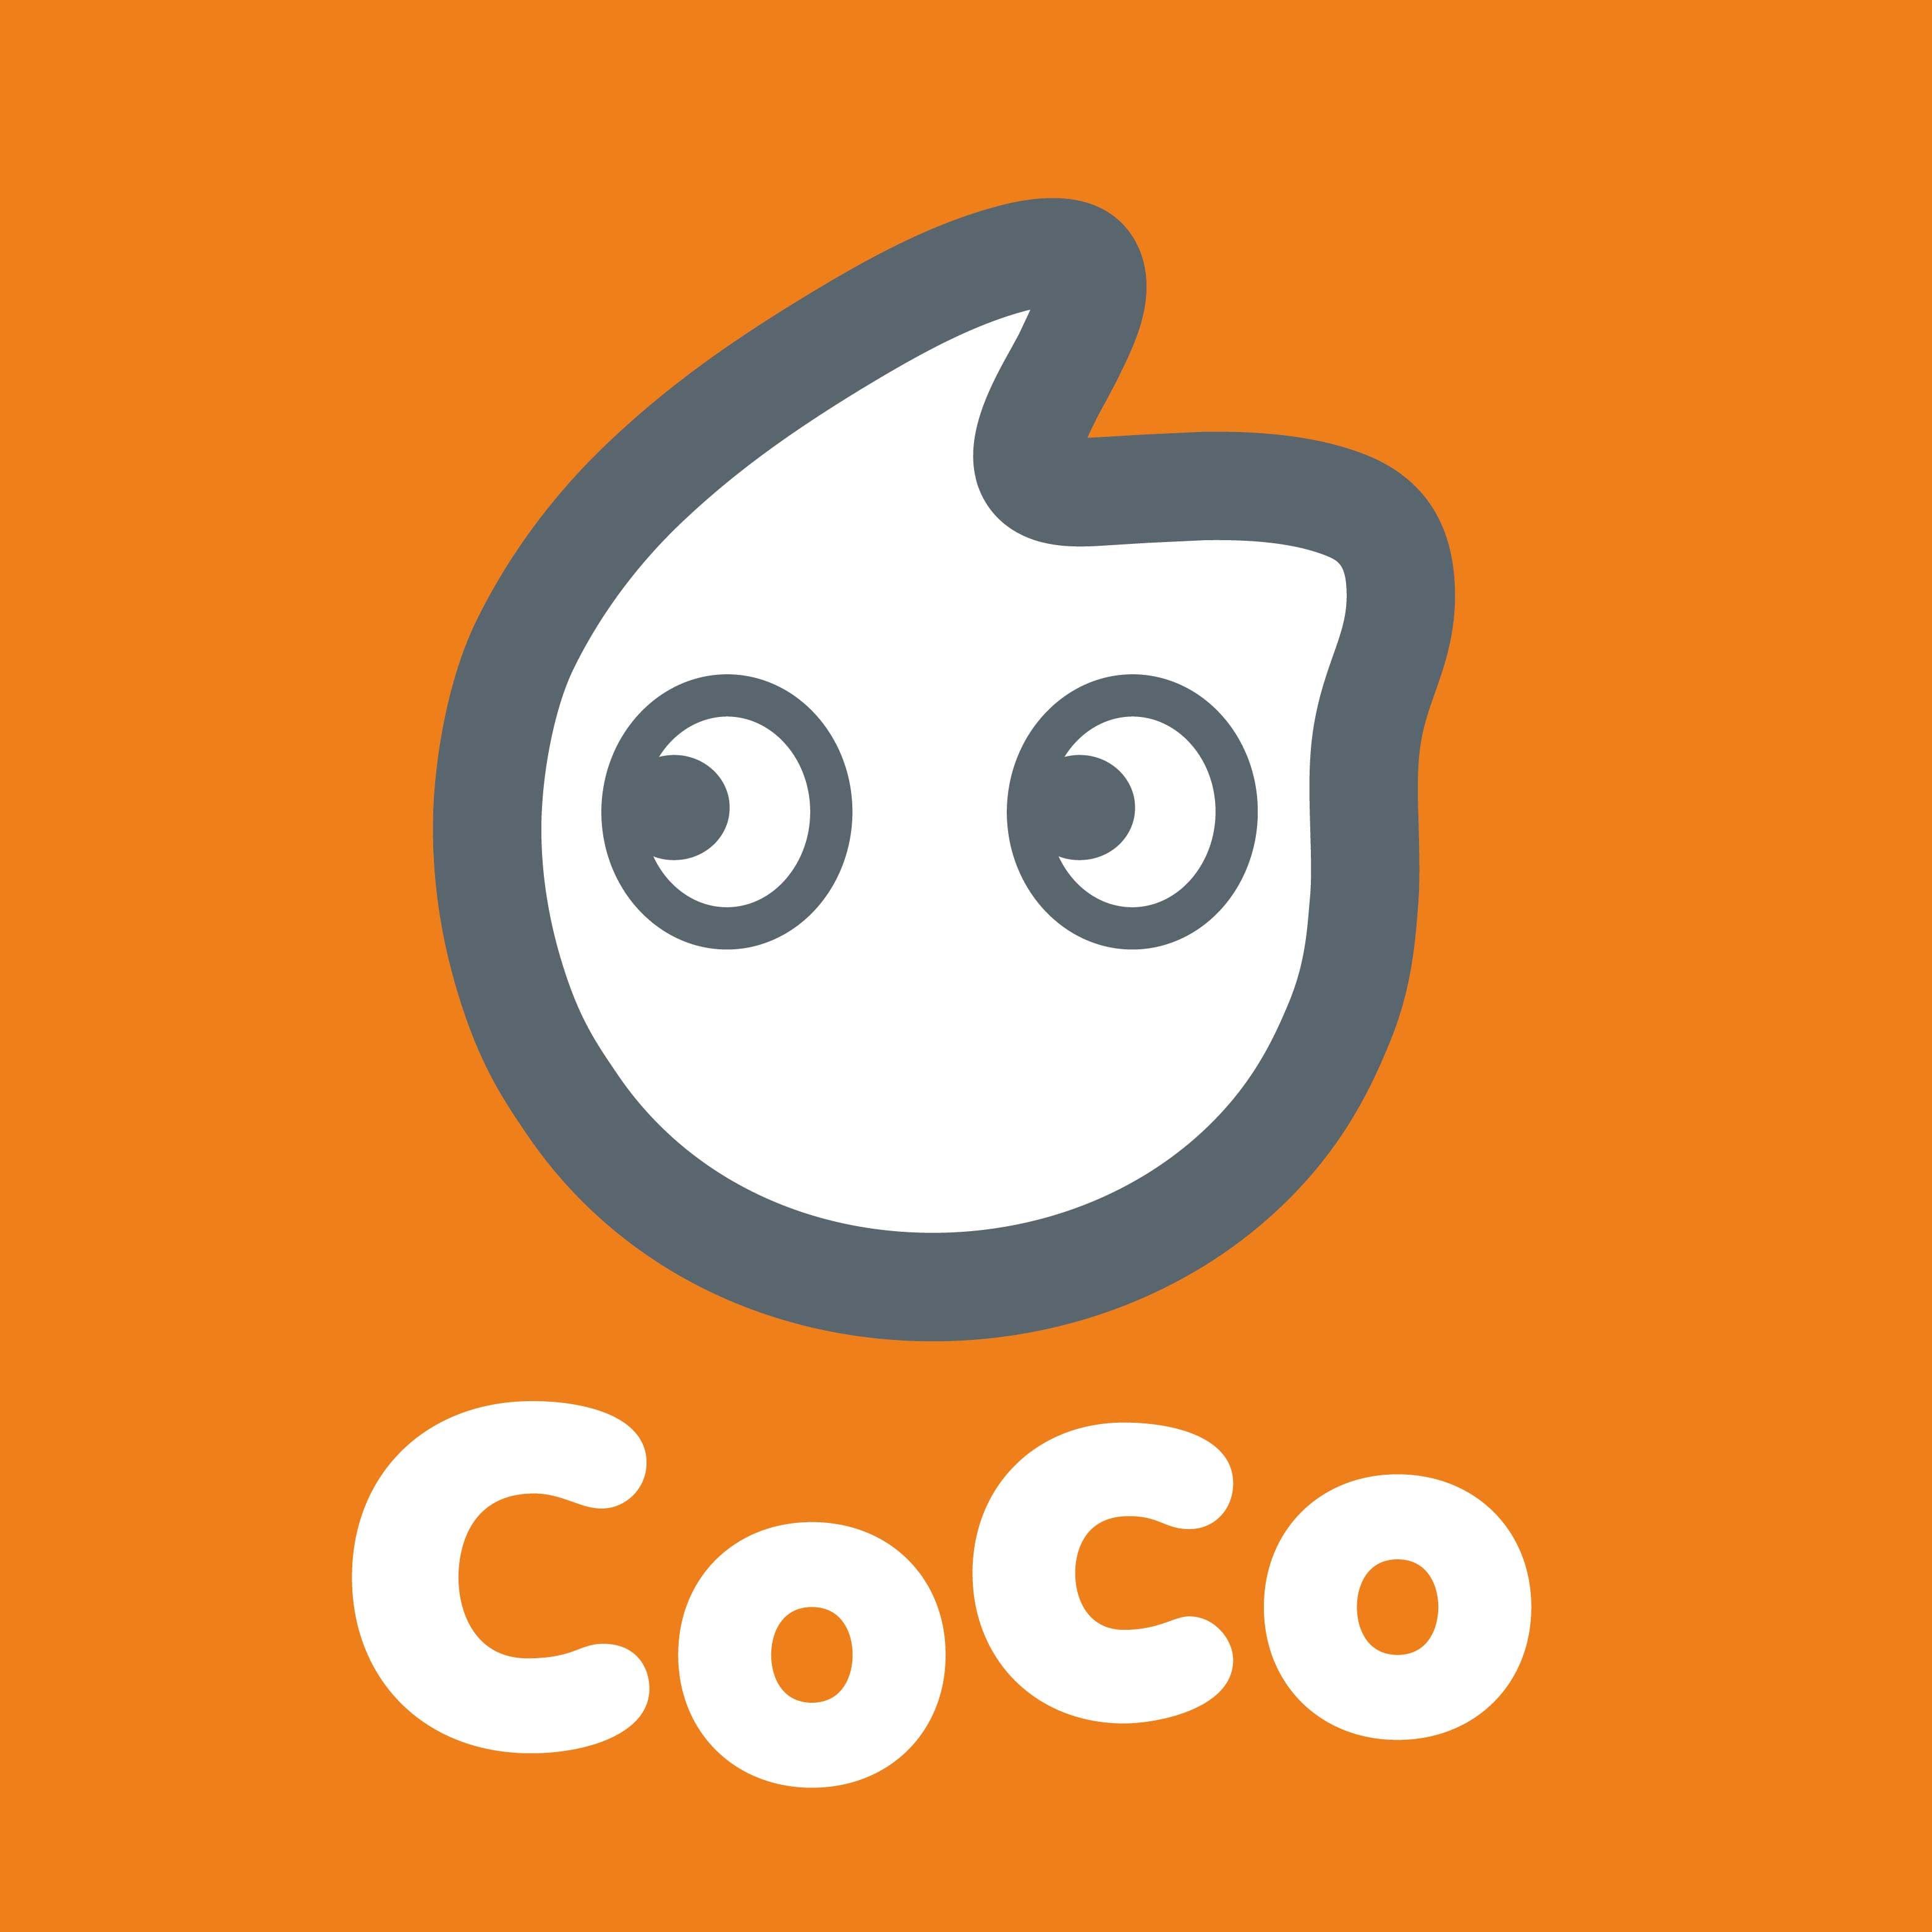 Coco Logo designs, themes, templates and downloadable graphic elements on  Dribbble